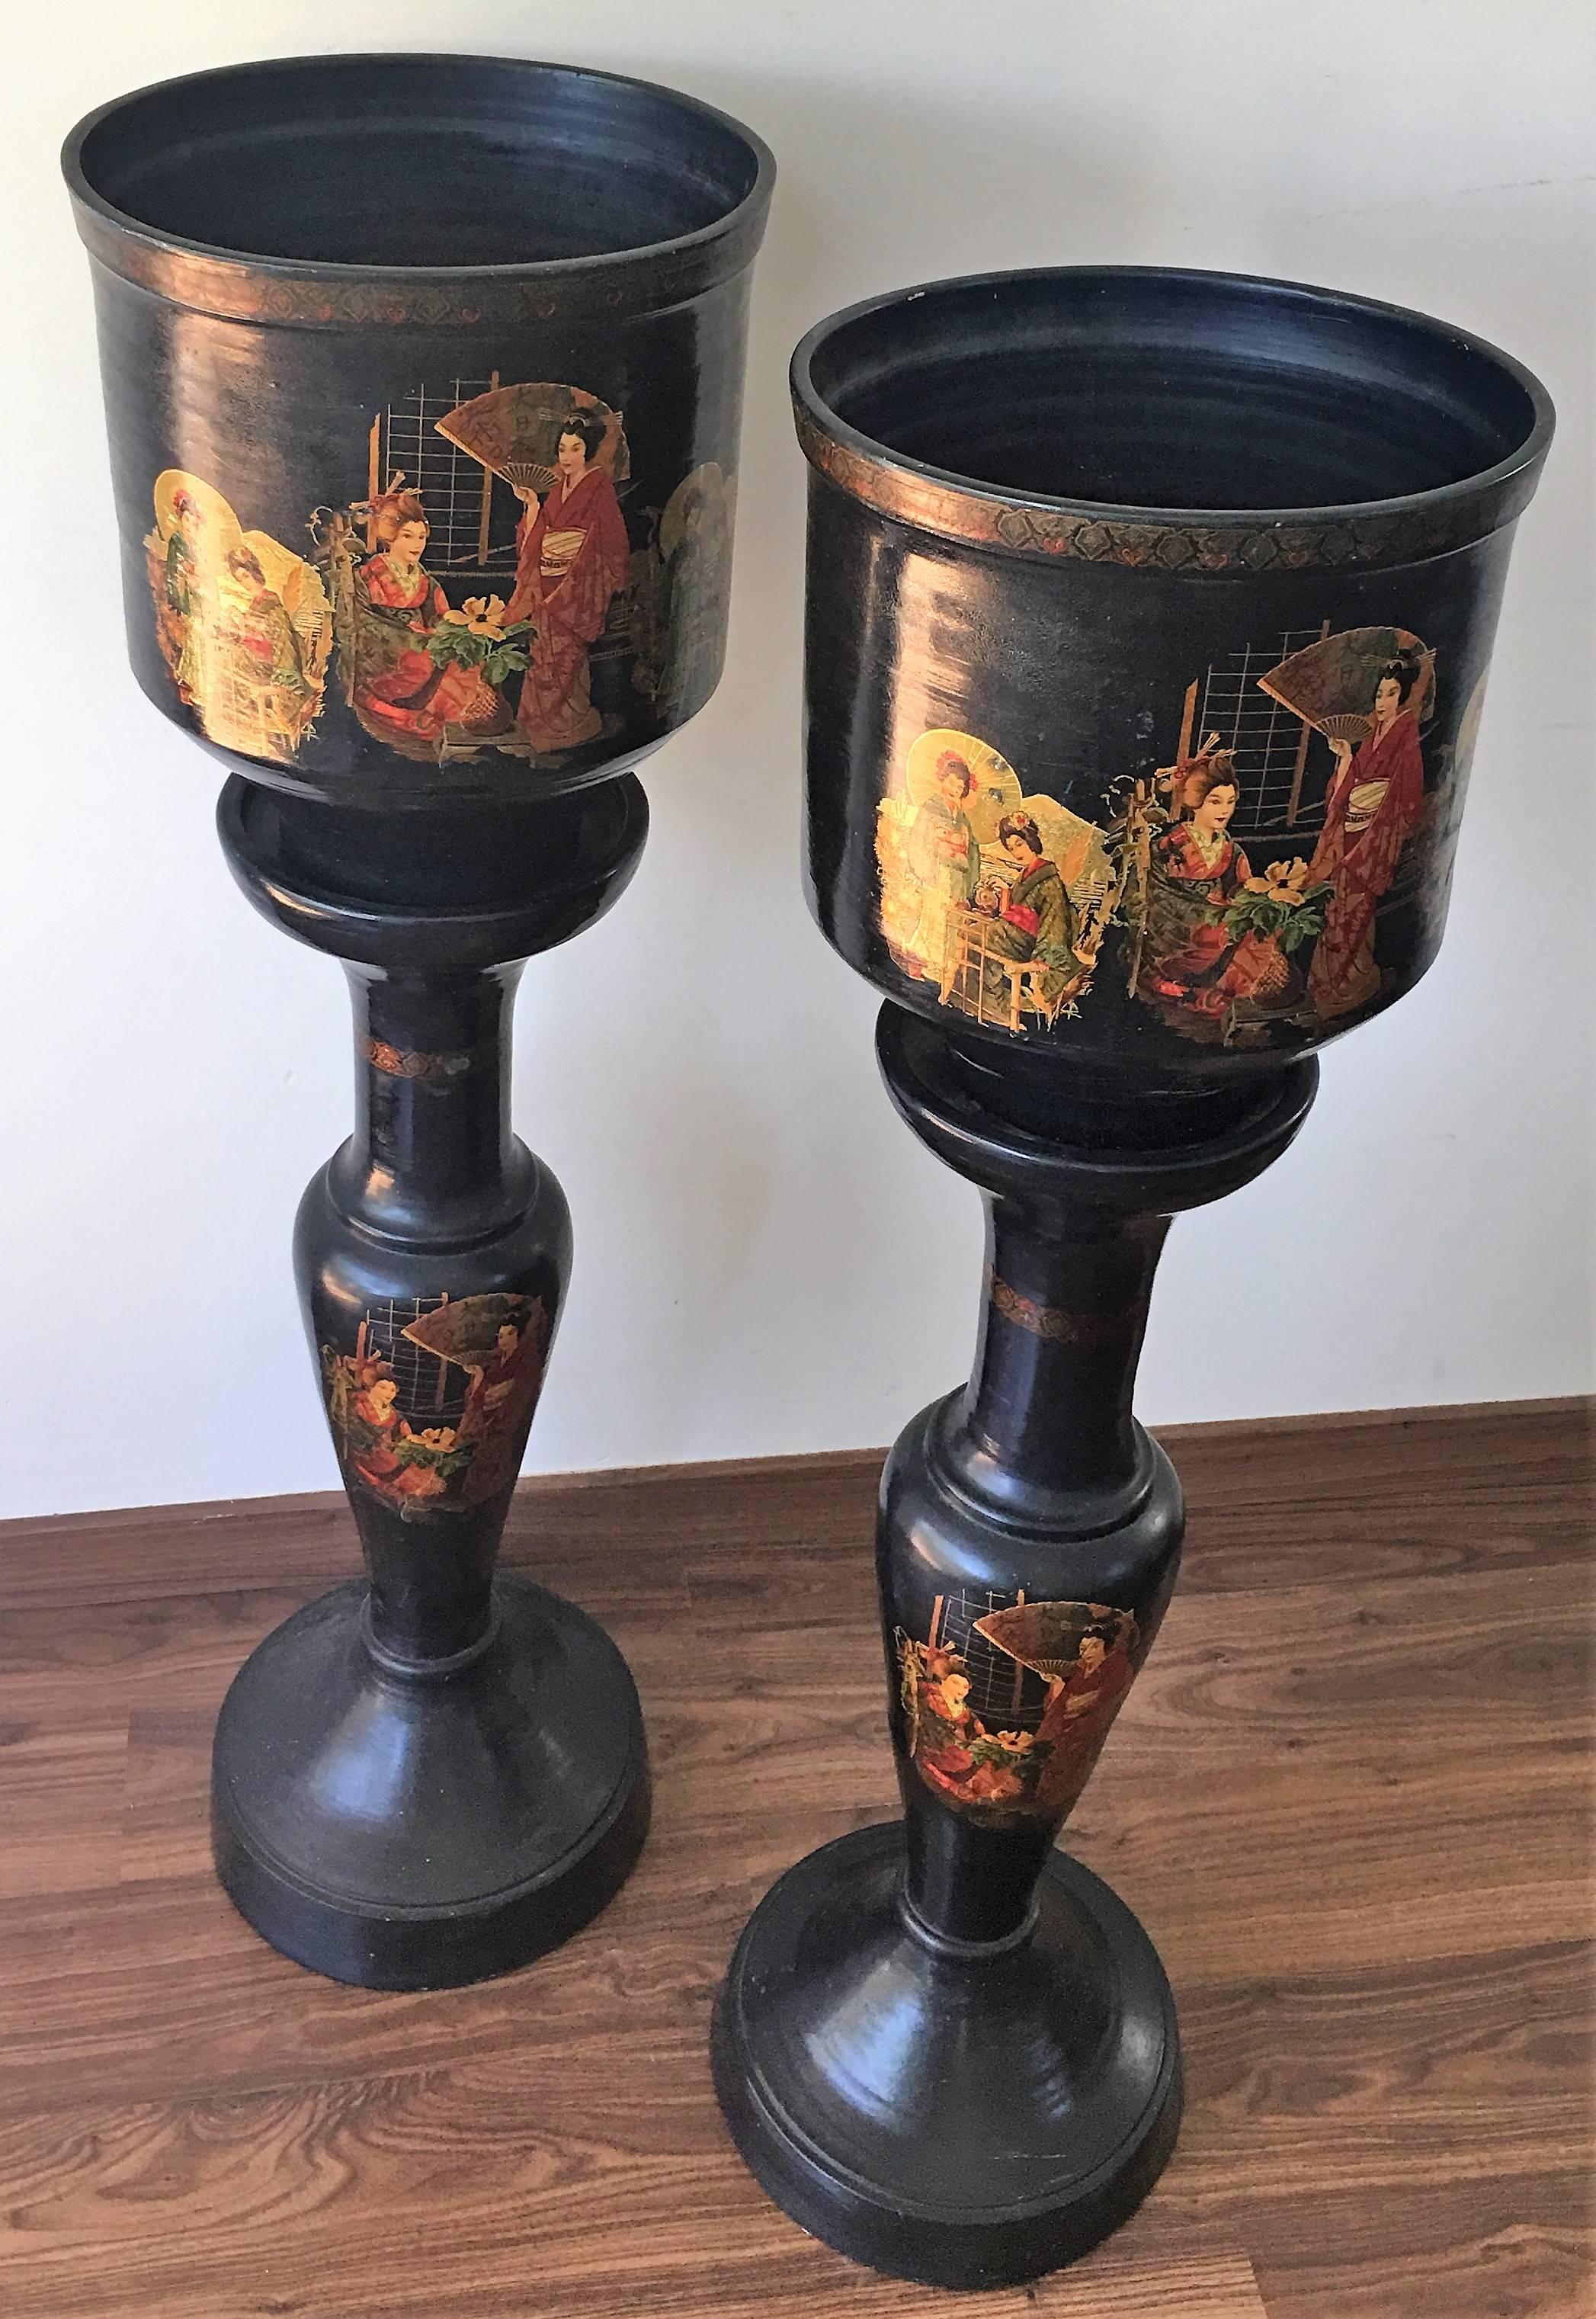 Pair of large chinoiserie style urns or vases on pedestals of glazed terracotta

Measurements:
Item A:
Pedestal: H 31.29 in, D 12.99 in, W 13.38 in
Total height with vase 45.66 in

Item B:
Pedestal: H 30.70 in, D 12.79 in, W 12.79 in
Total height